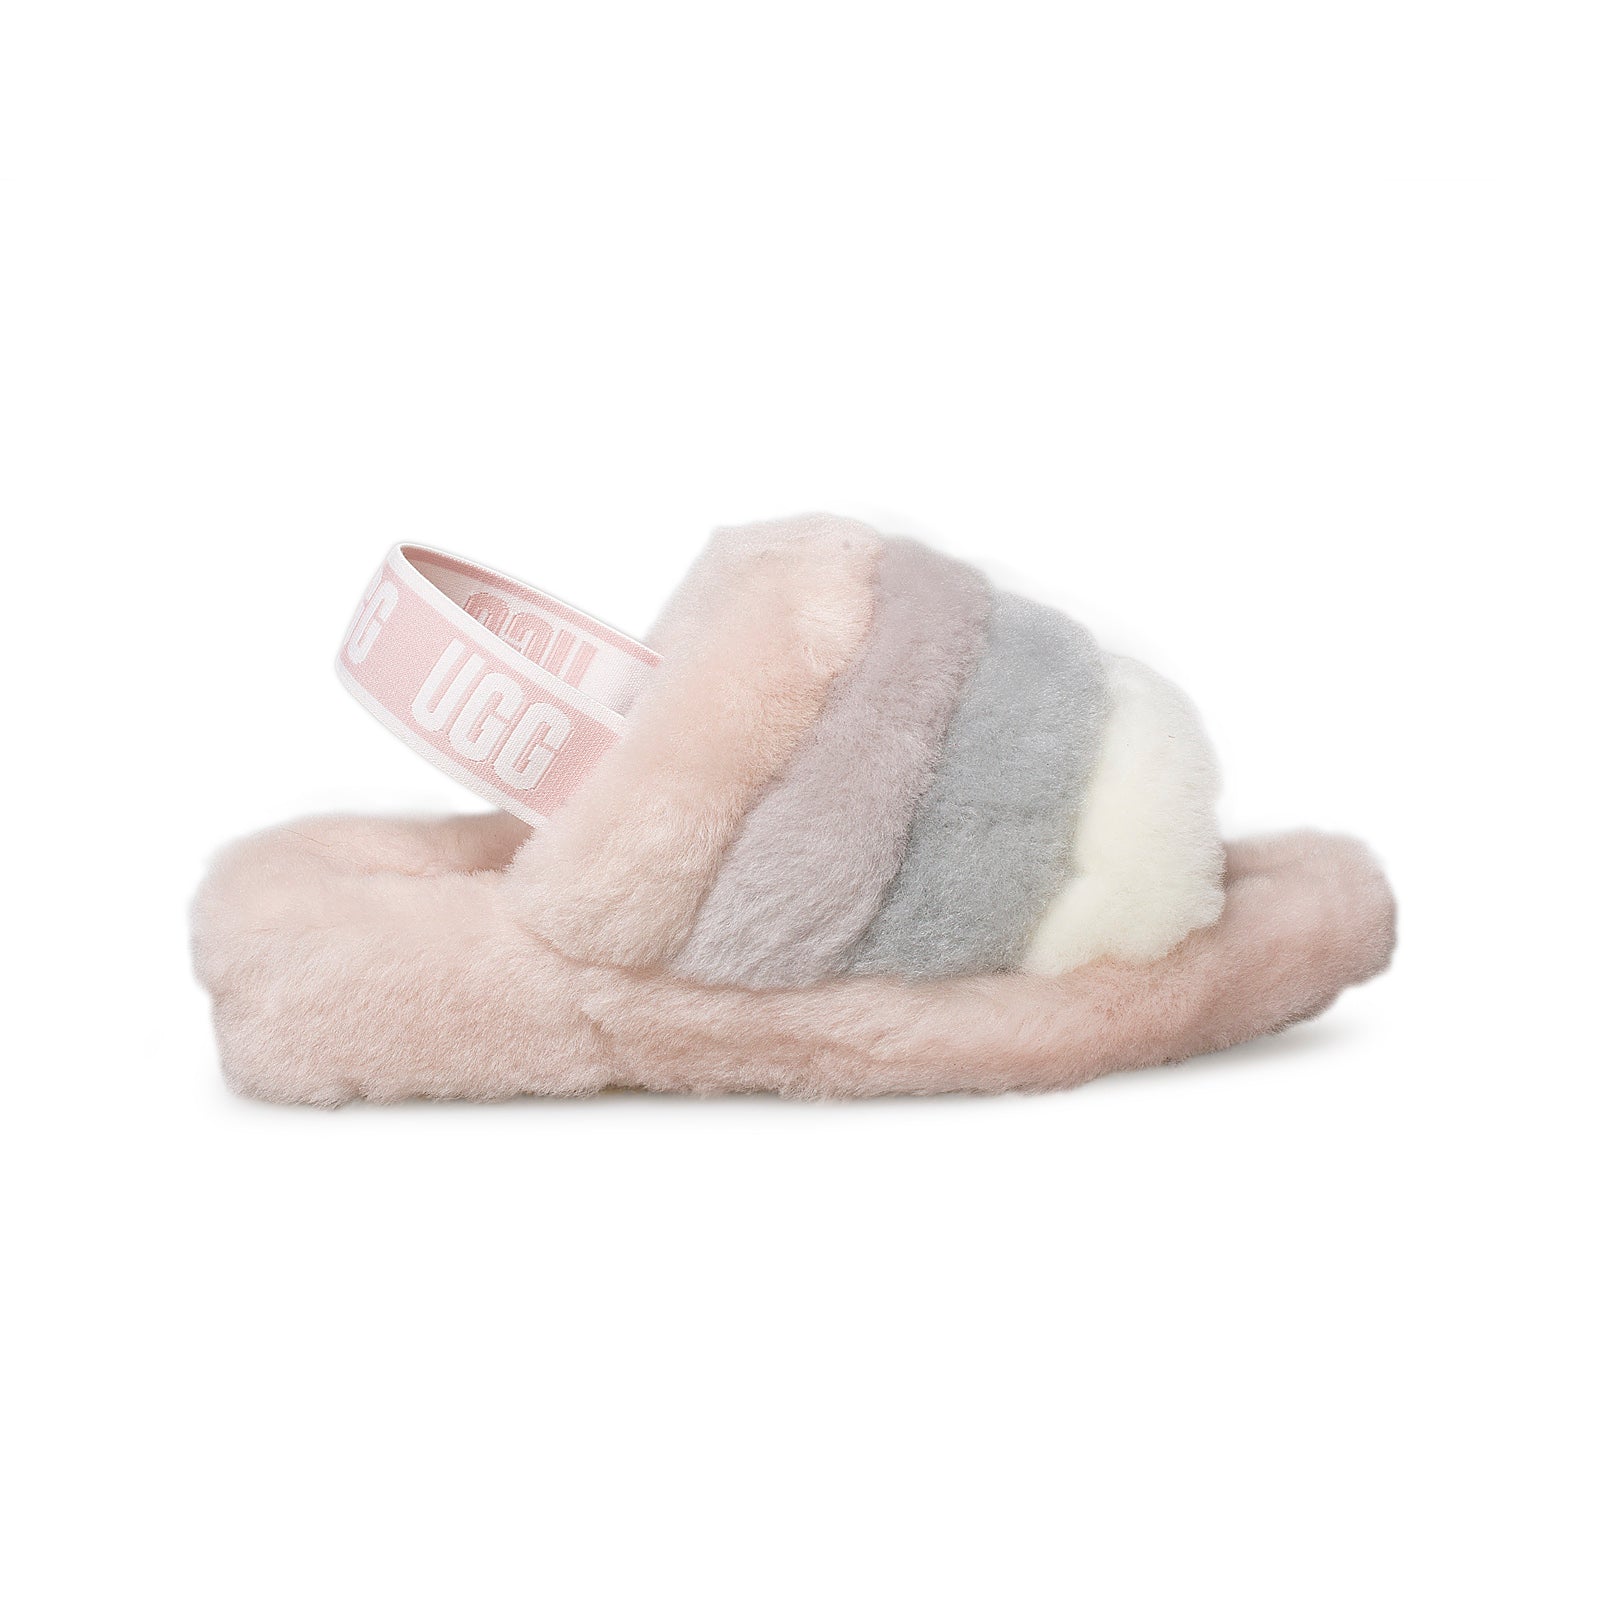 youth ugg slippers